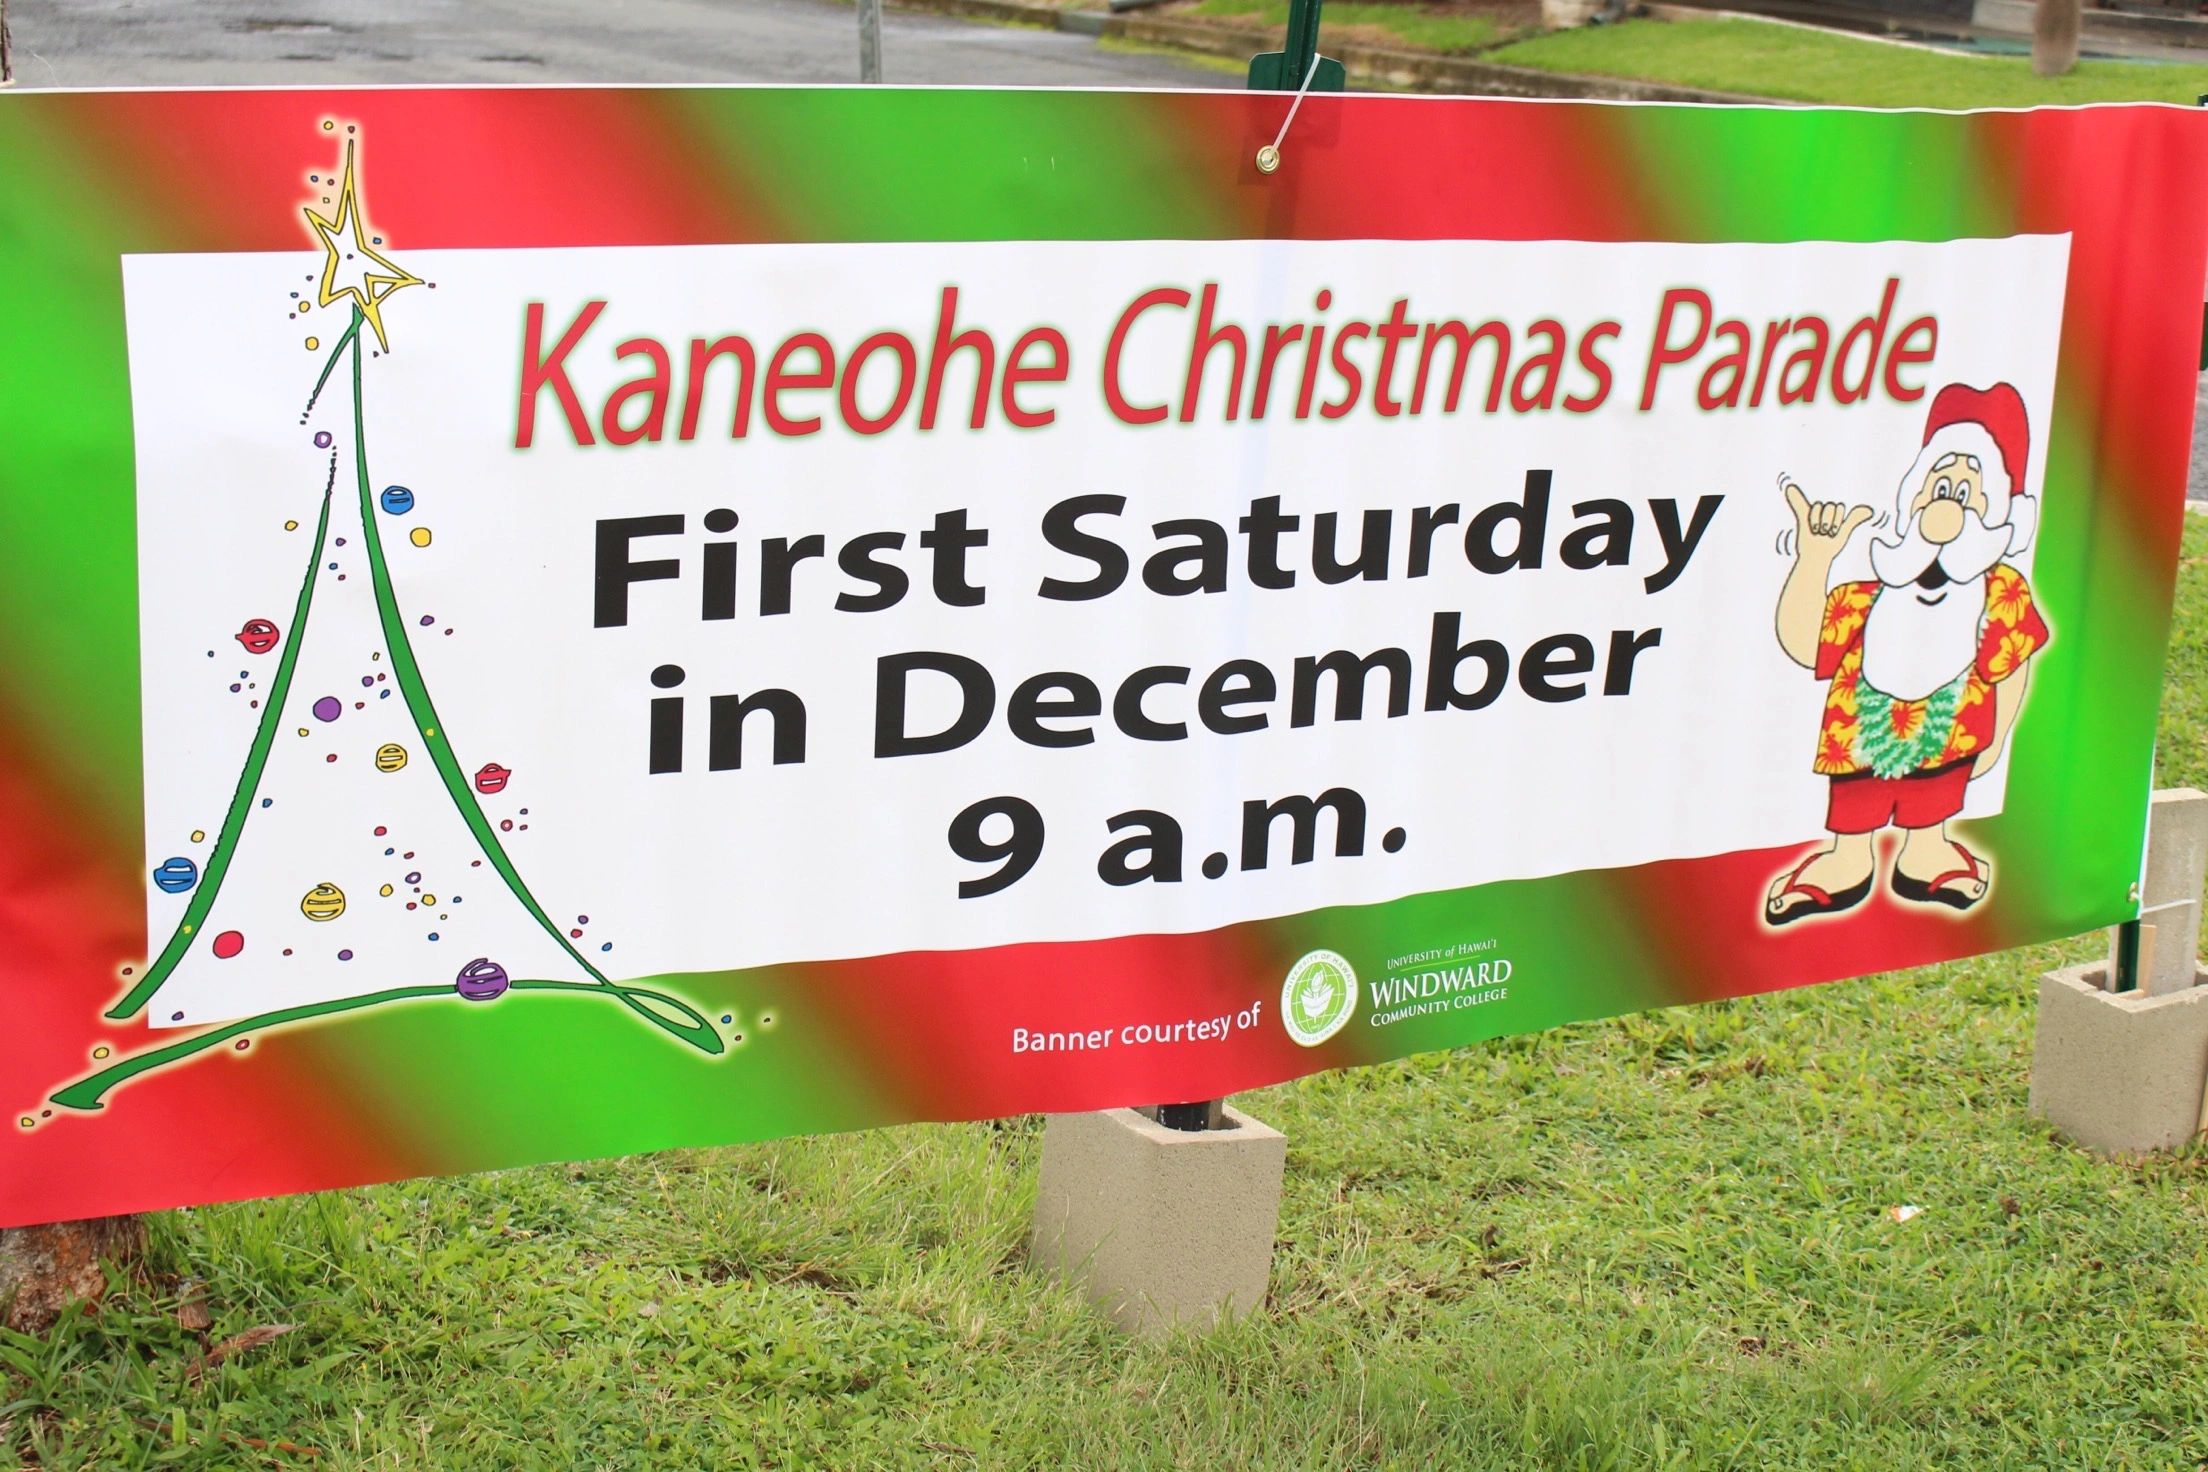 About Kaneohe Christmas Parade